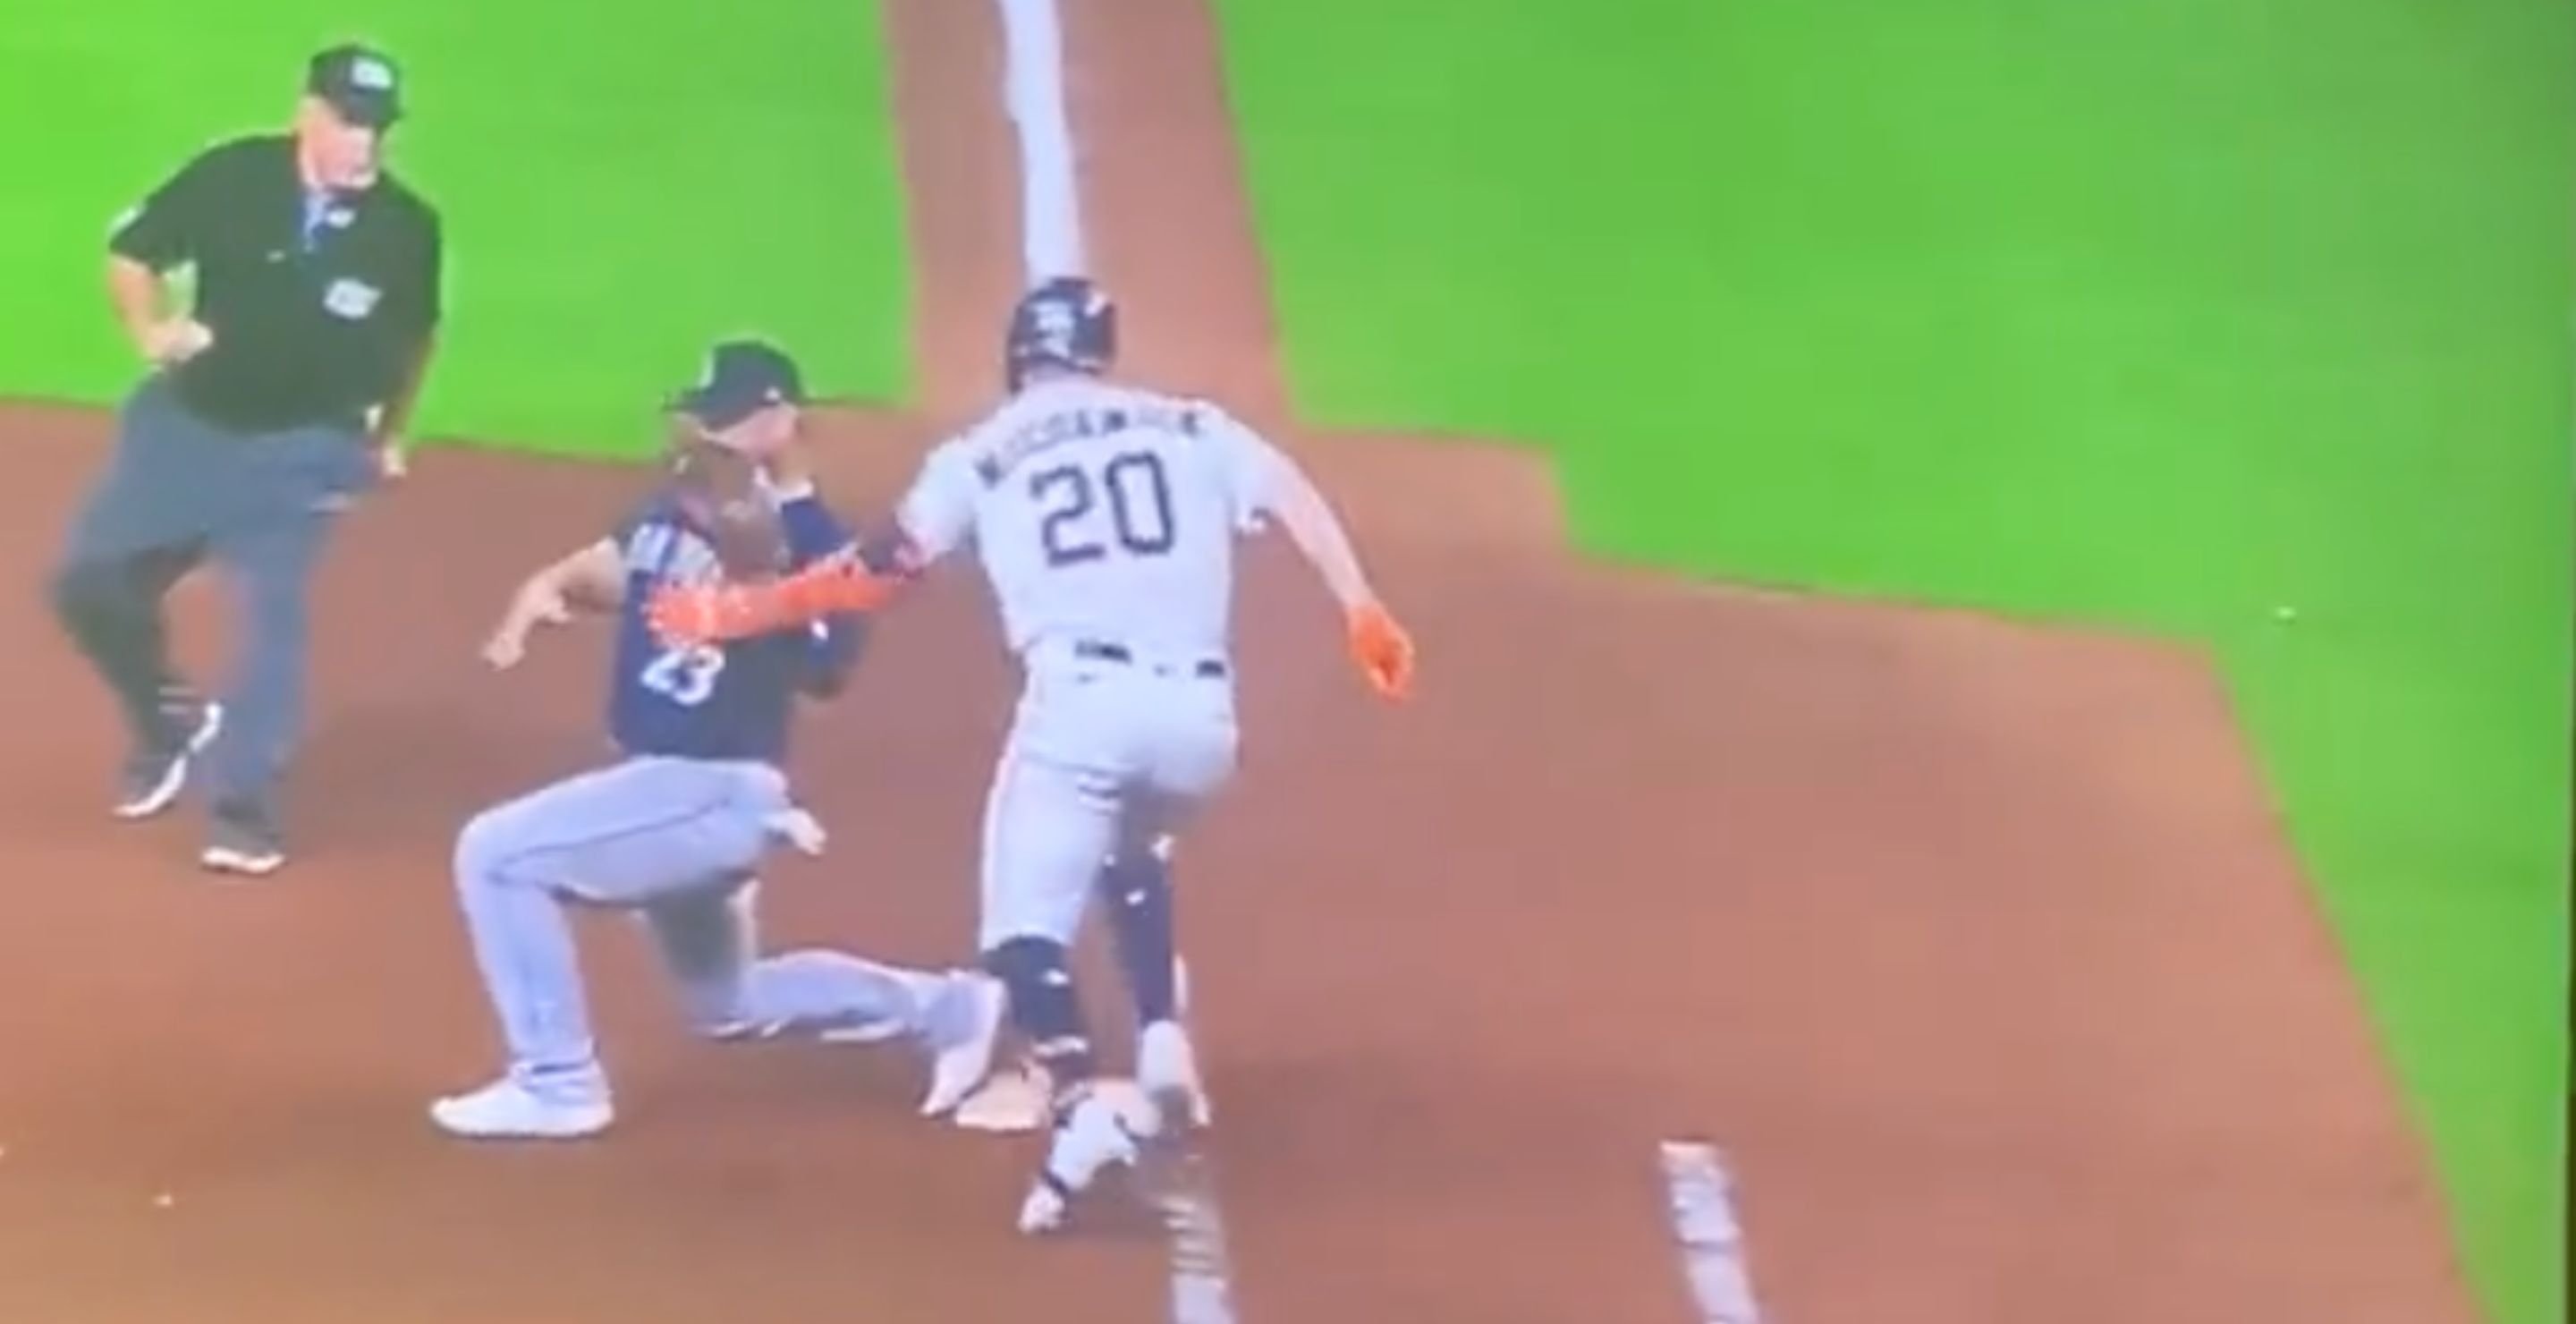 Astros Player Under Fire For Dirty Play at First Base